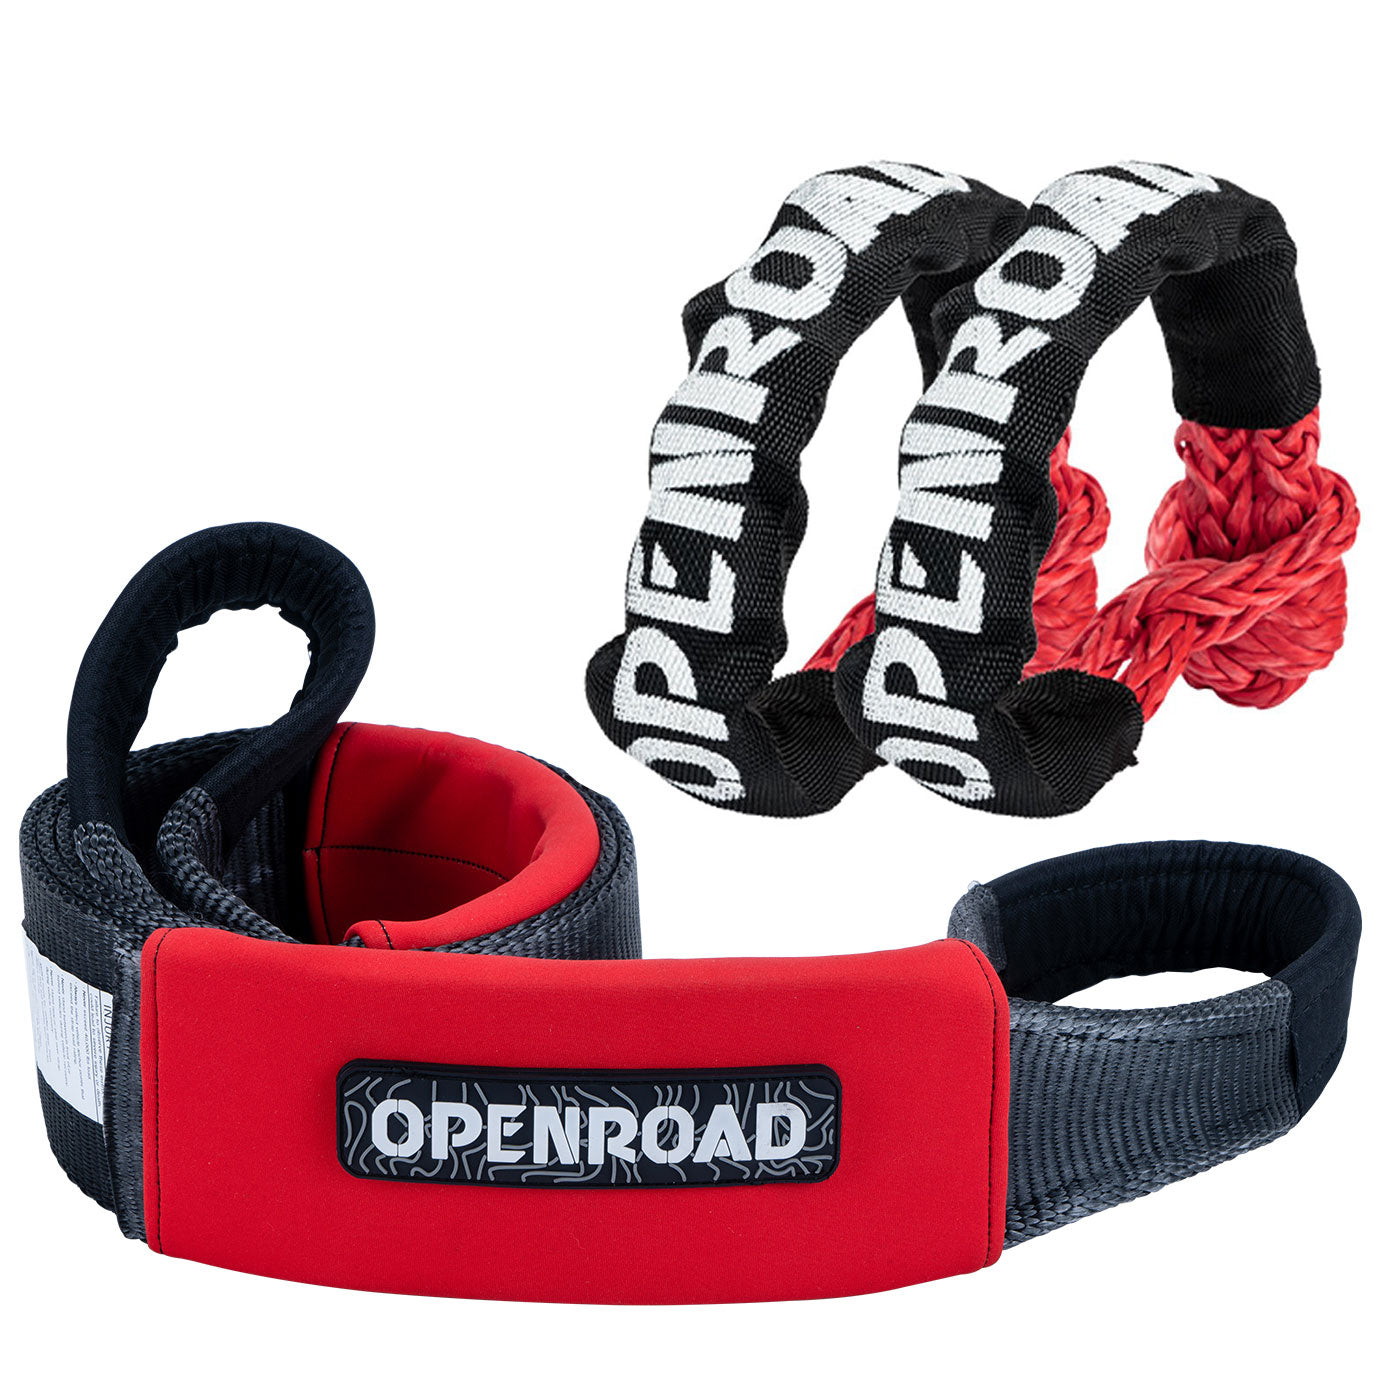 OPENROAD 4''x8' Break Strength 40,000 lbs Tree Saver Strap, Triple Reinforced Webbing. Towing Rope OPENROAD Tree Strap Add Soft Shackle Rope  